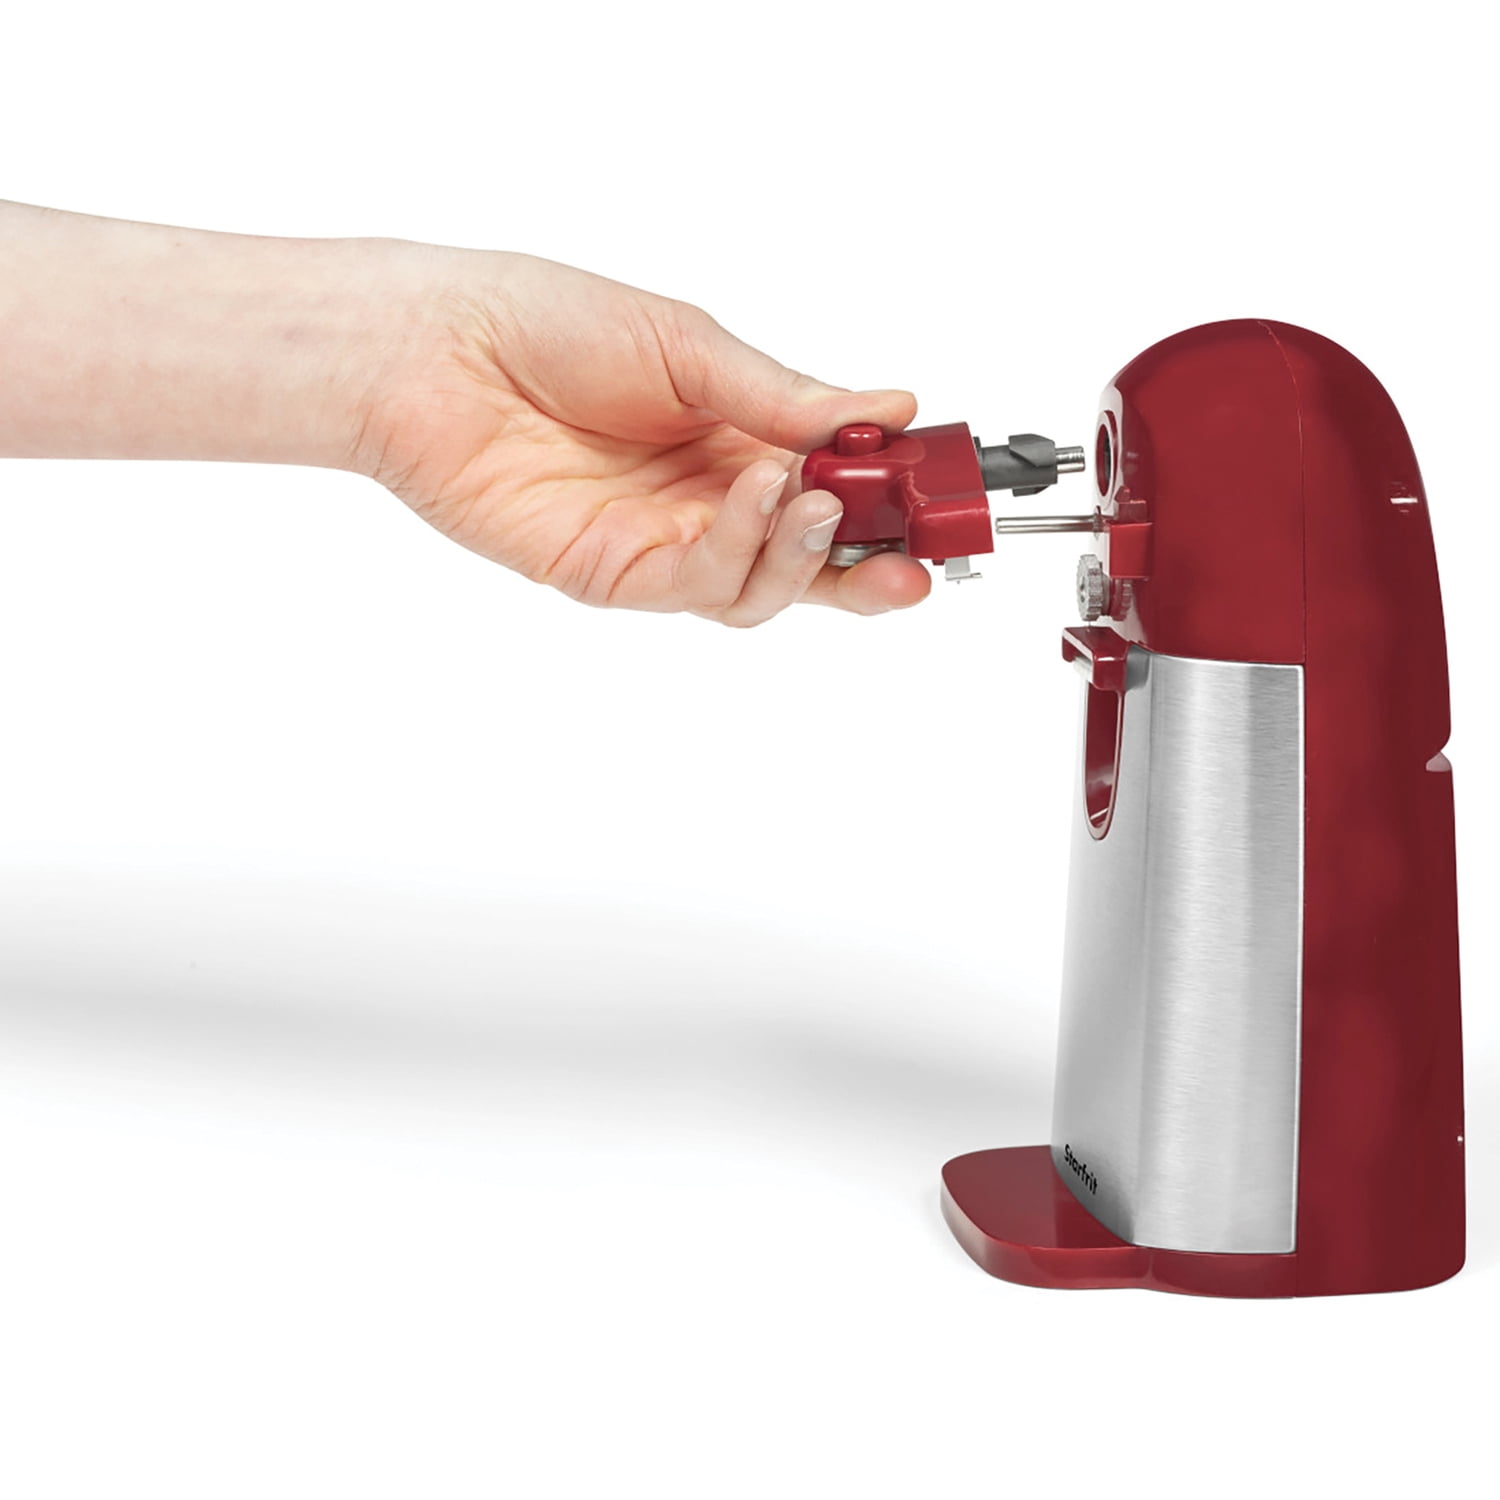 Starfrit 8-inch Mightican Electric Can Opener, Red - Curacao